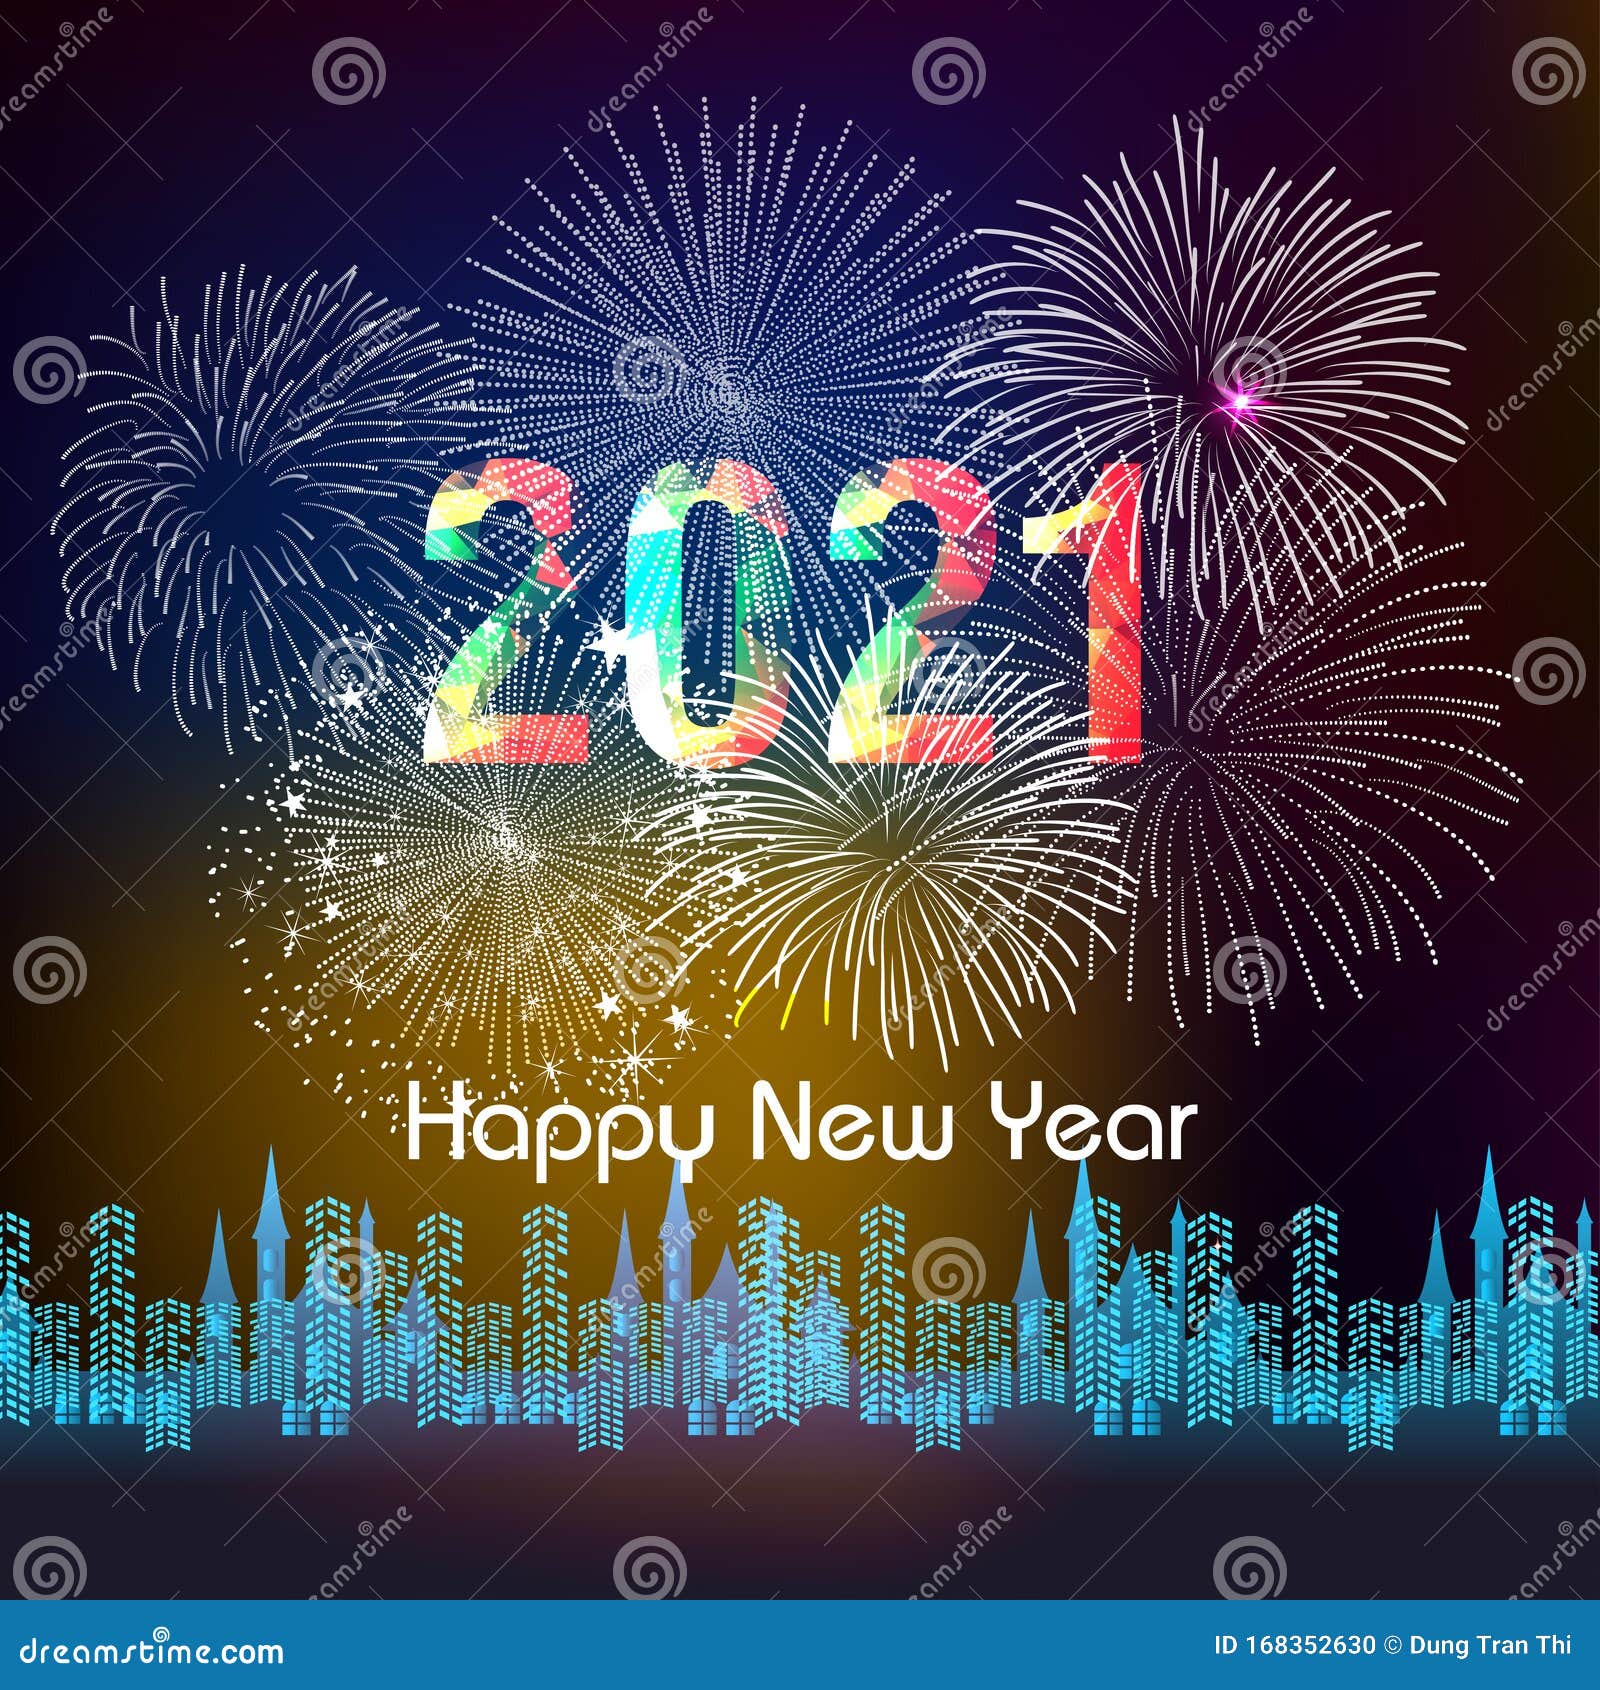 Happy New Year 2021 with Firework Background. Firework Display Colorful for  Holidays Stock Vector - Illustration of flash, beauty: 168352630